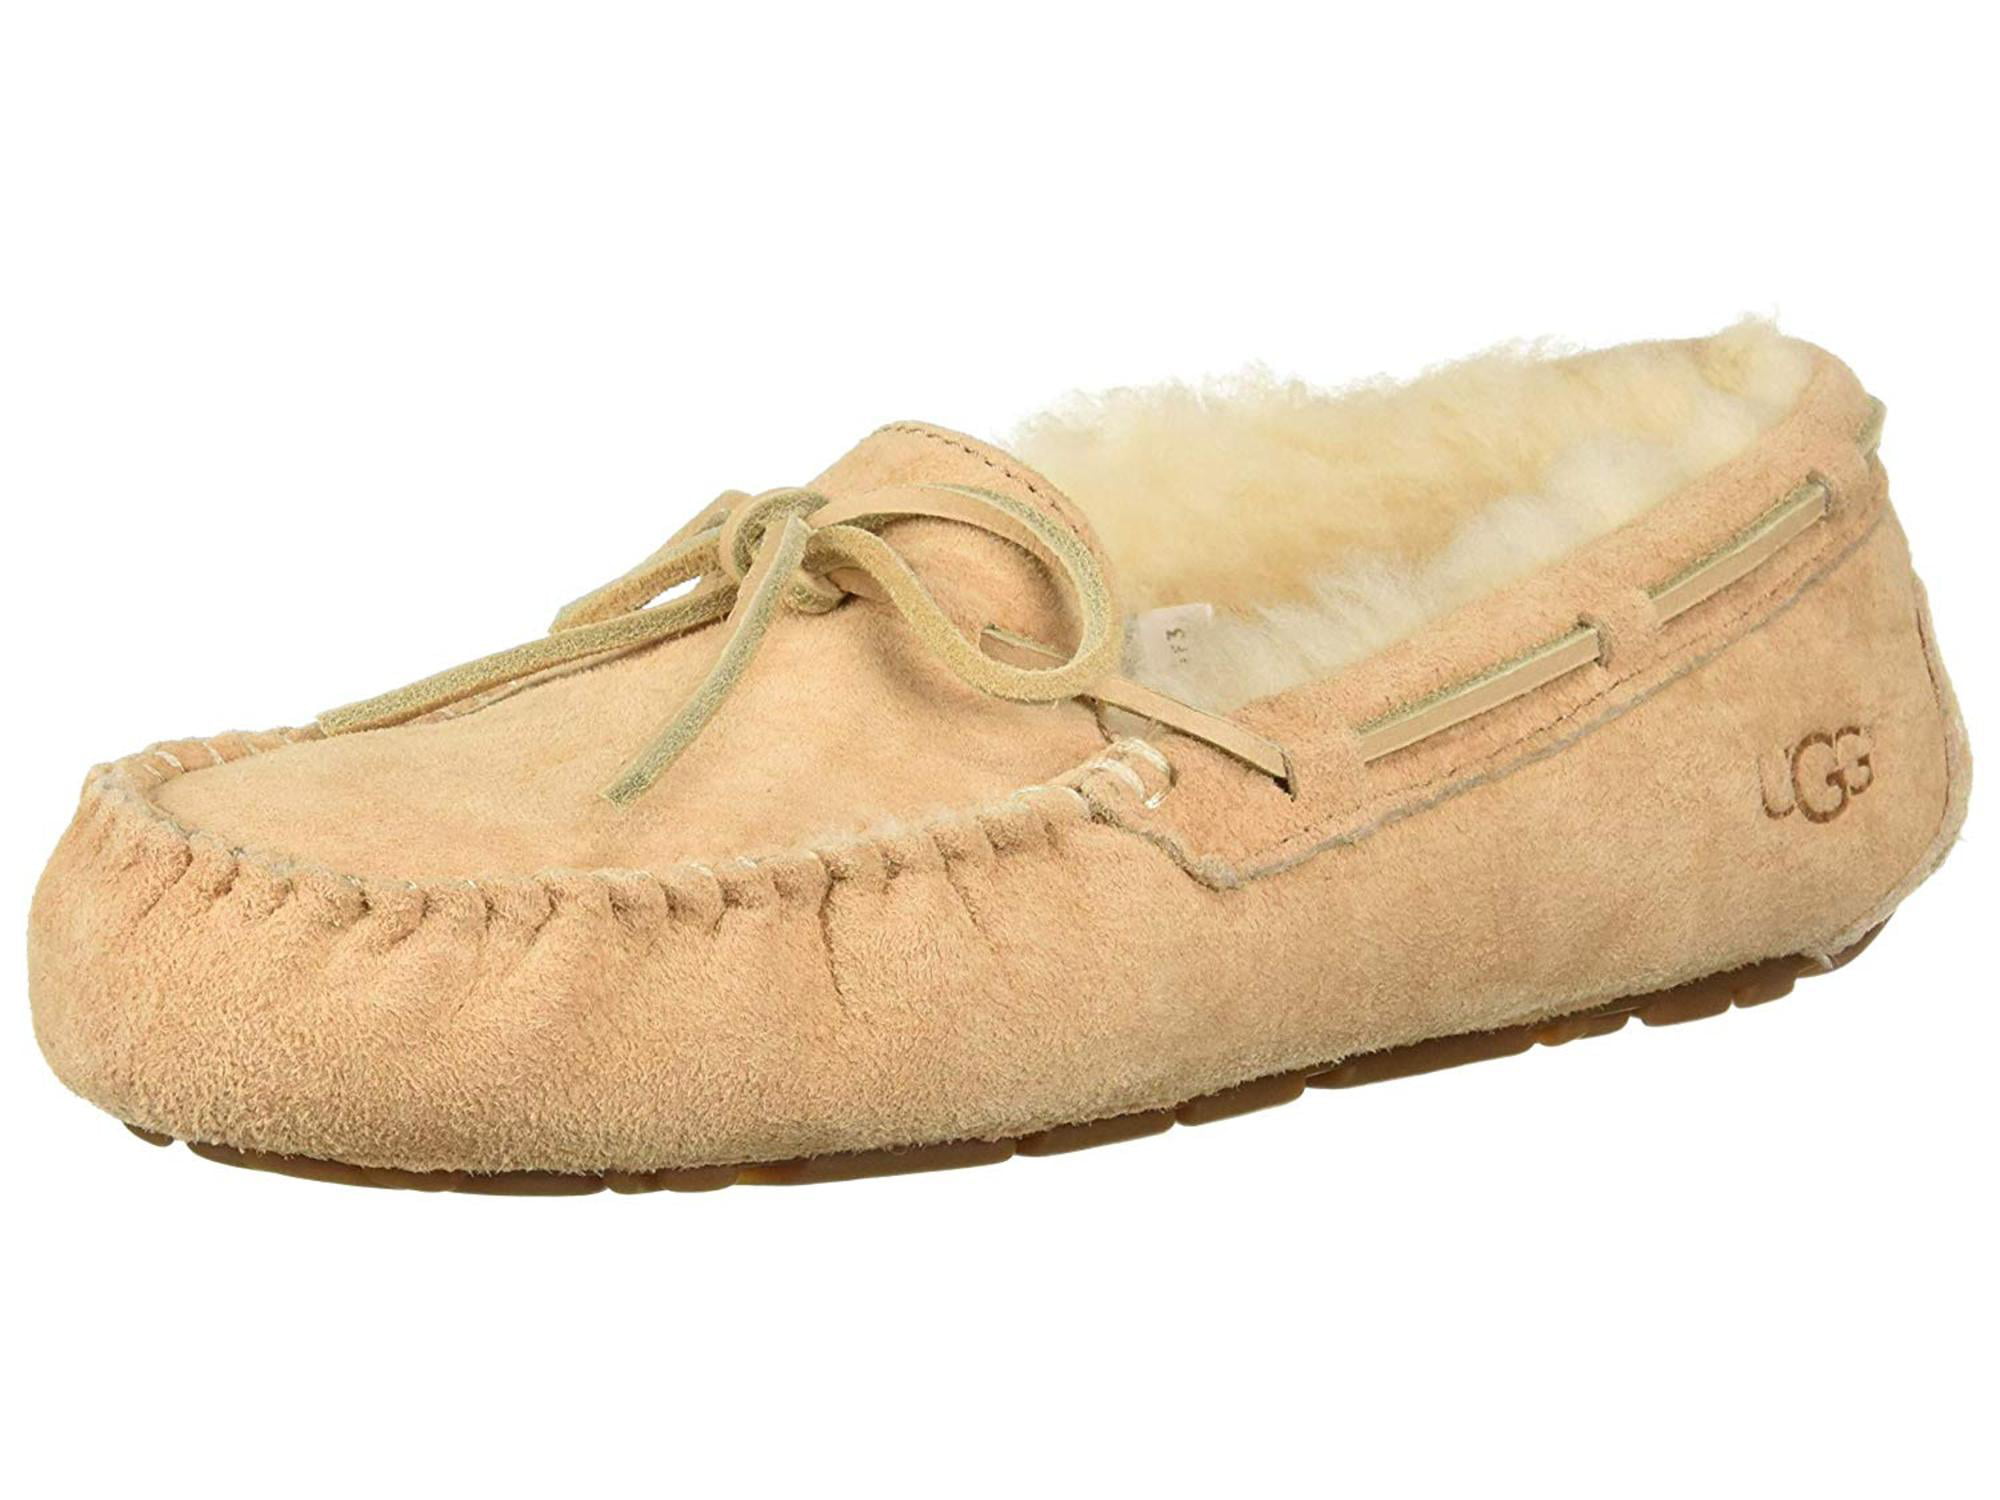 uggs canada slippers